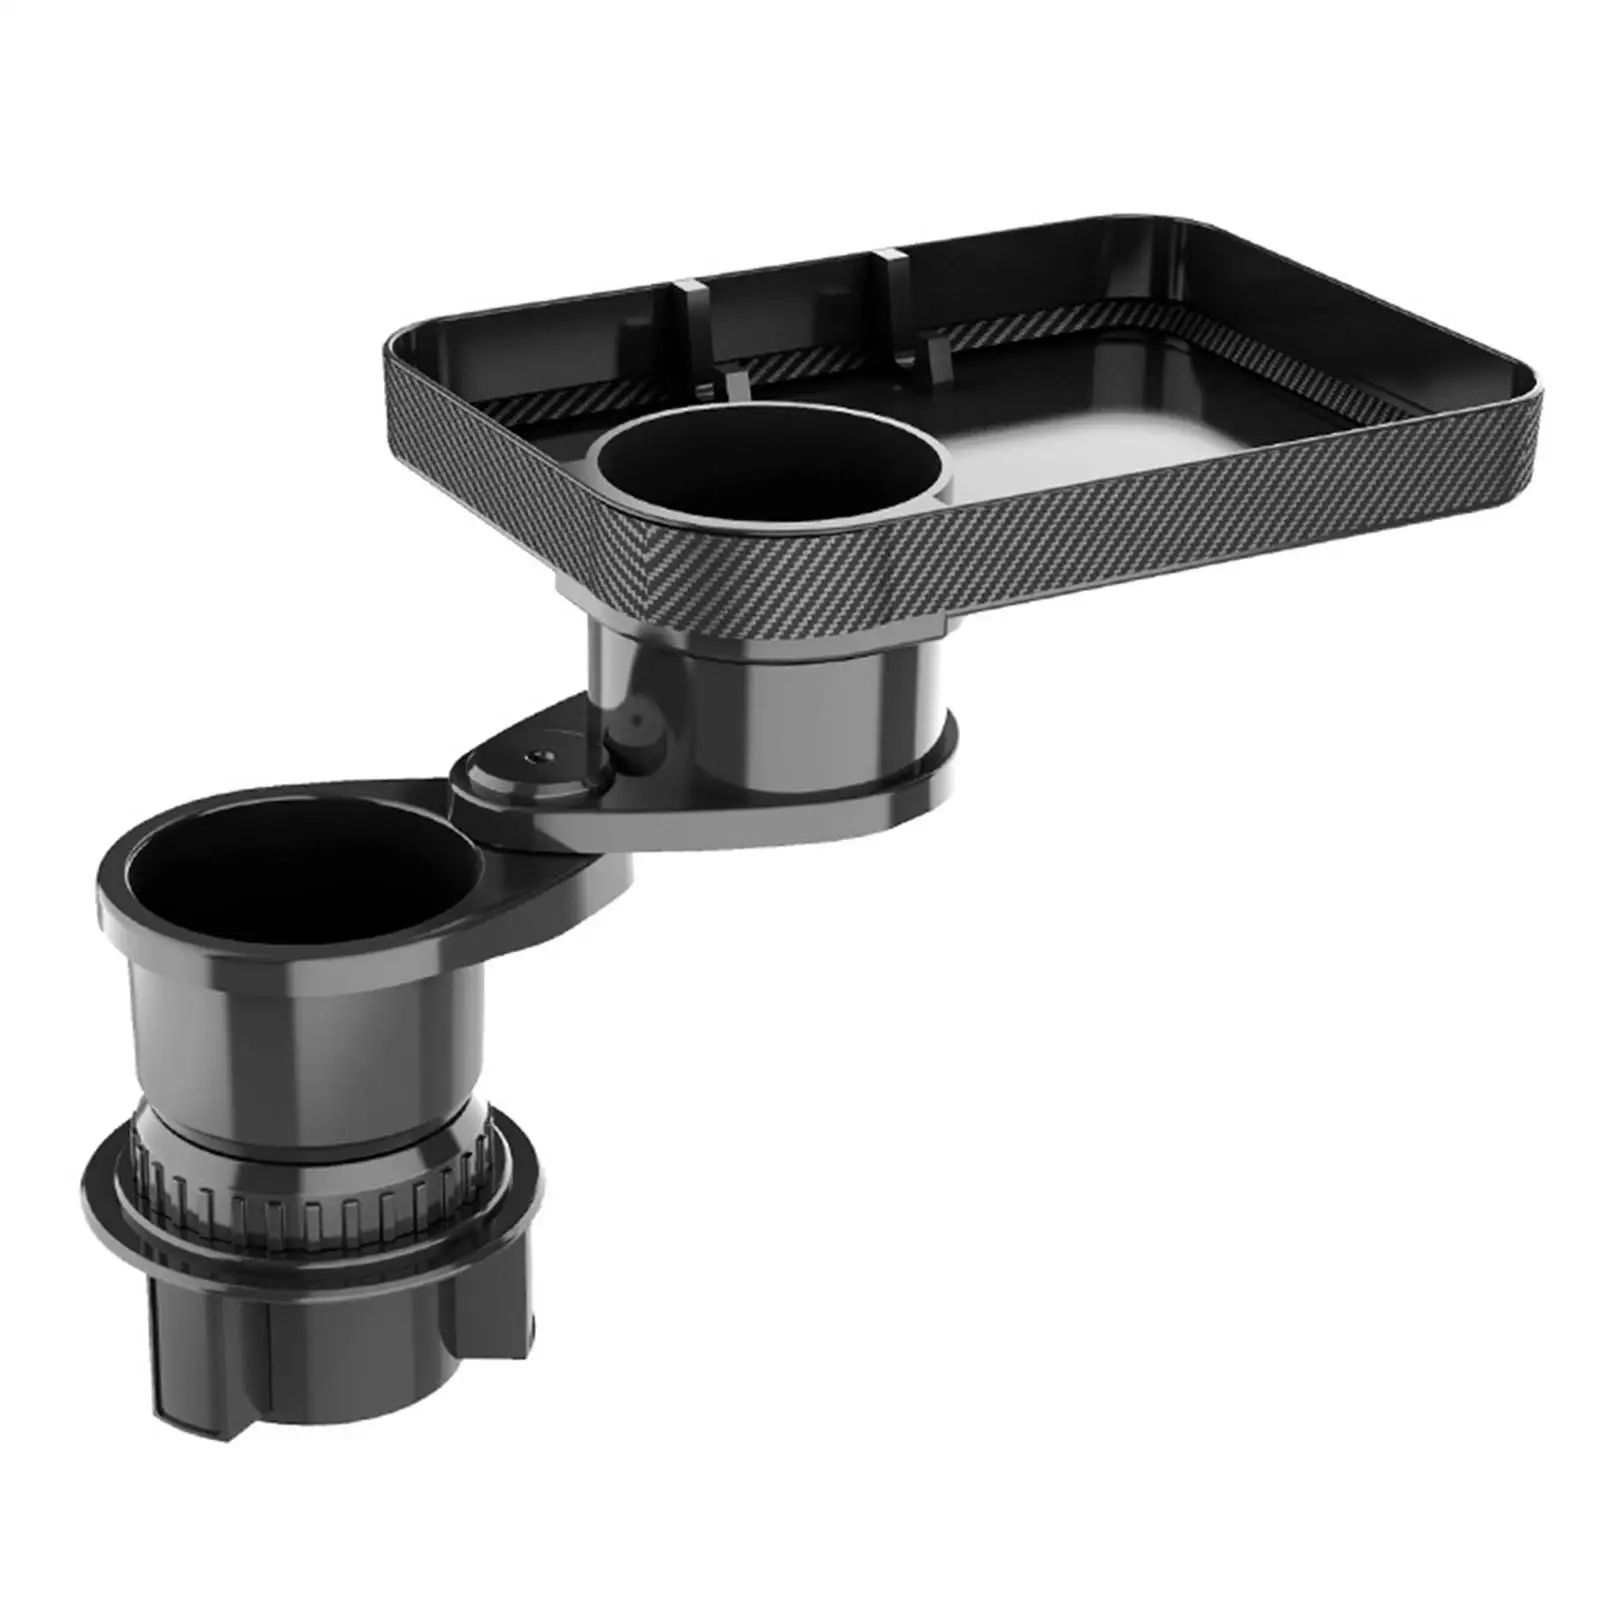 Car Cup Holder Expander Generic Cup Holder Tray for Keys Vehicle Trucks